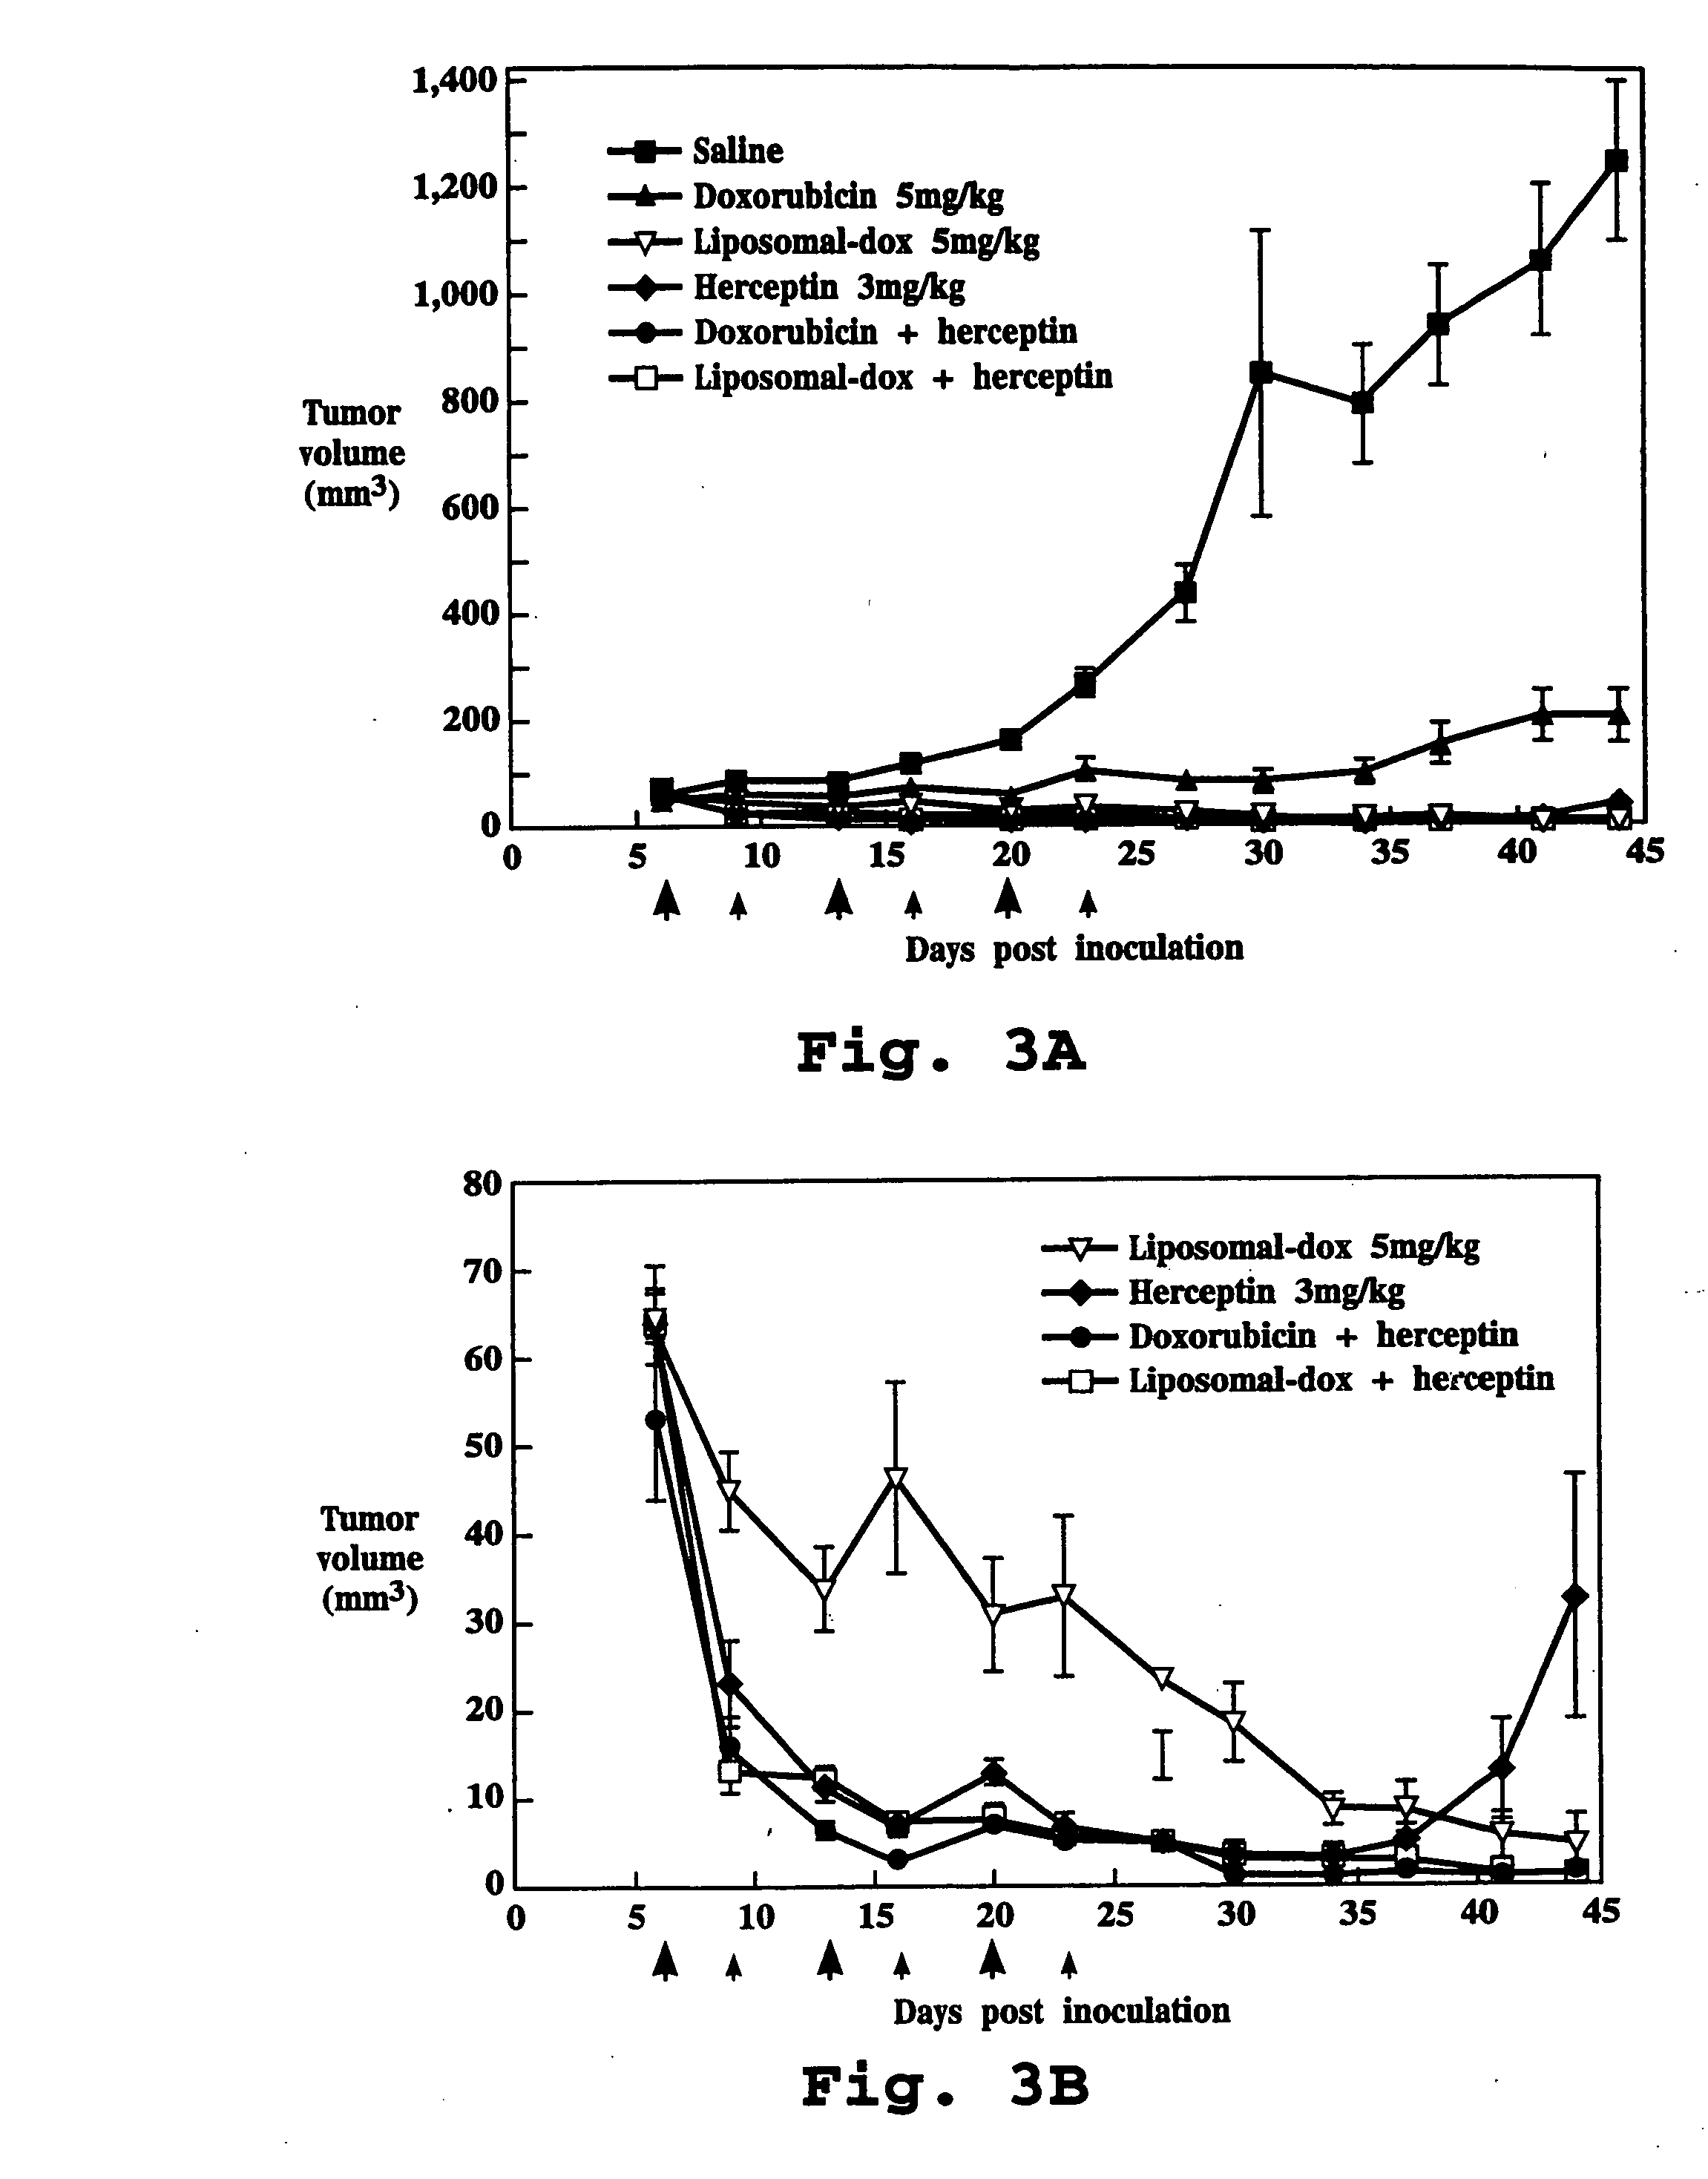 Method for potentiating activity of a chemotherapeutic drug